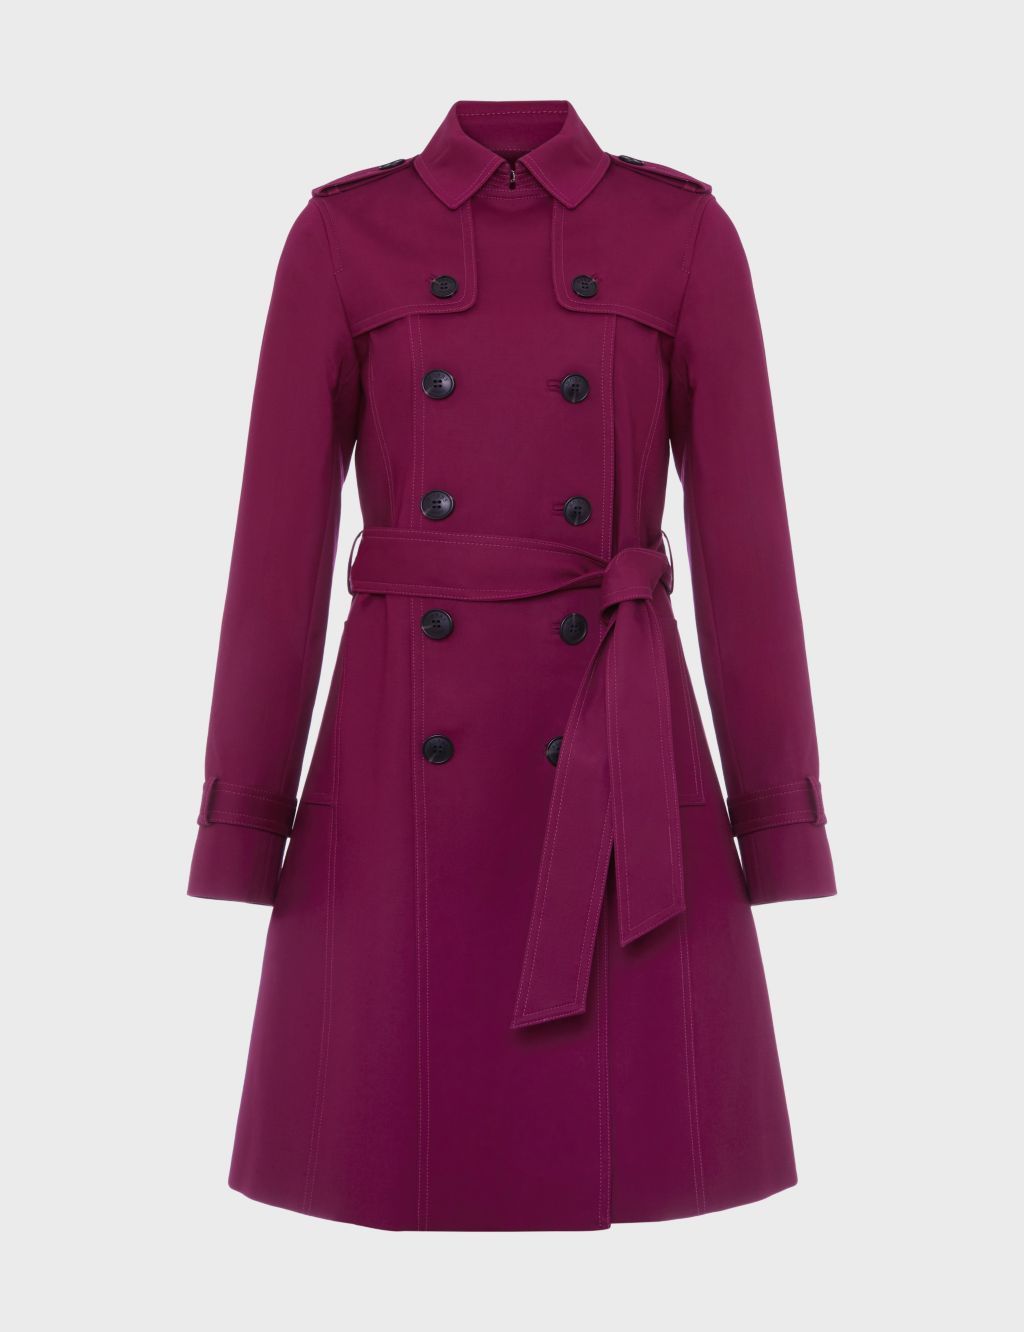 Cotton Rich Double Breasted Trench Coat image 2